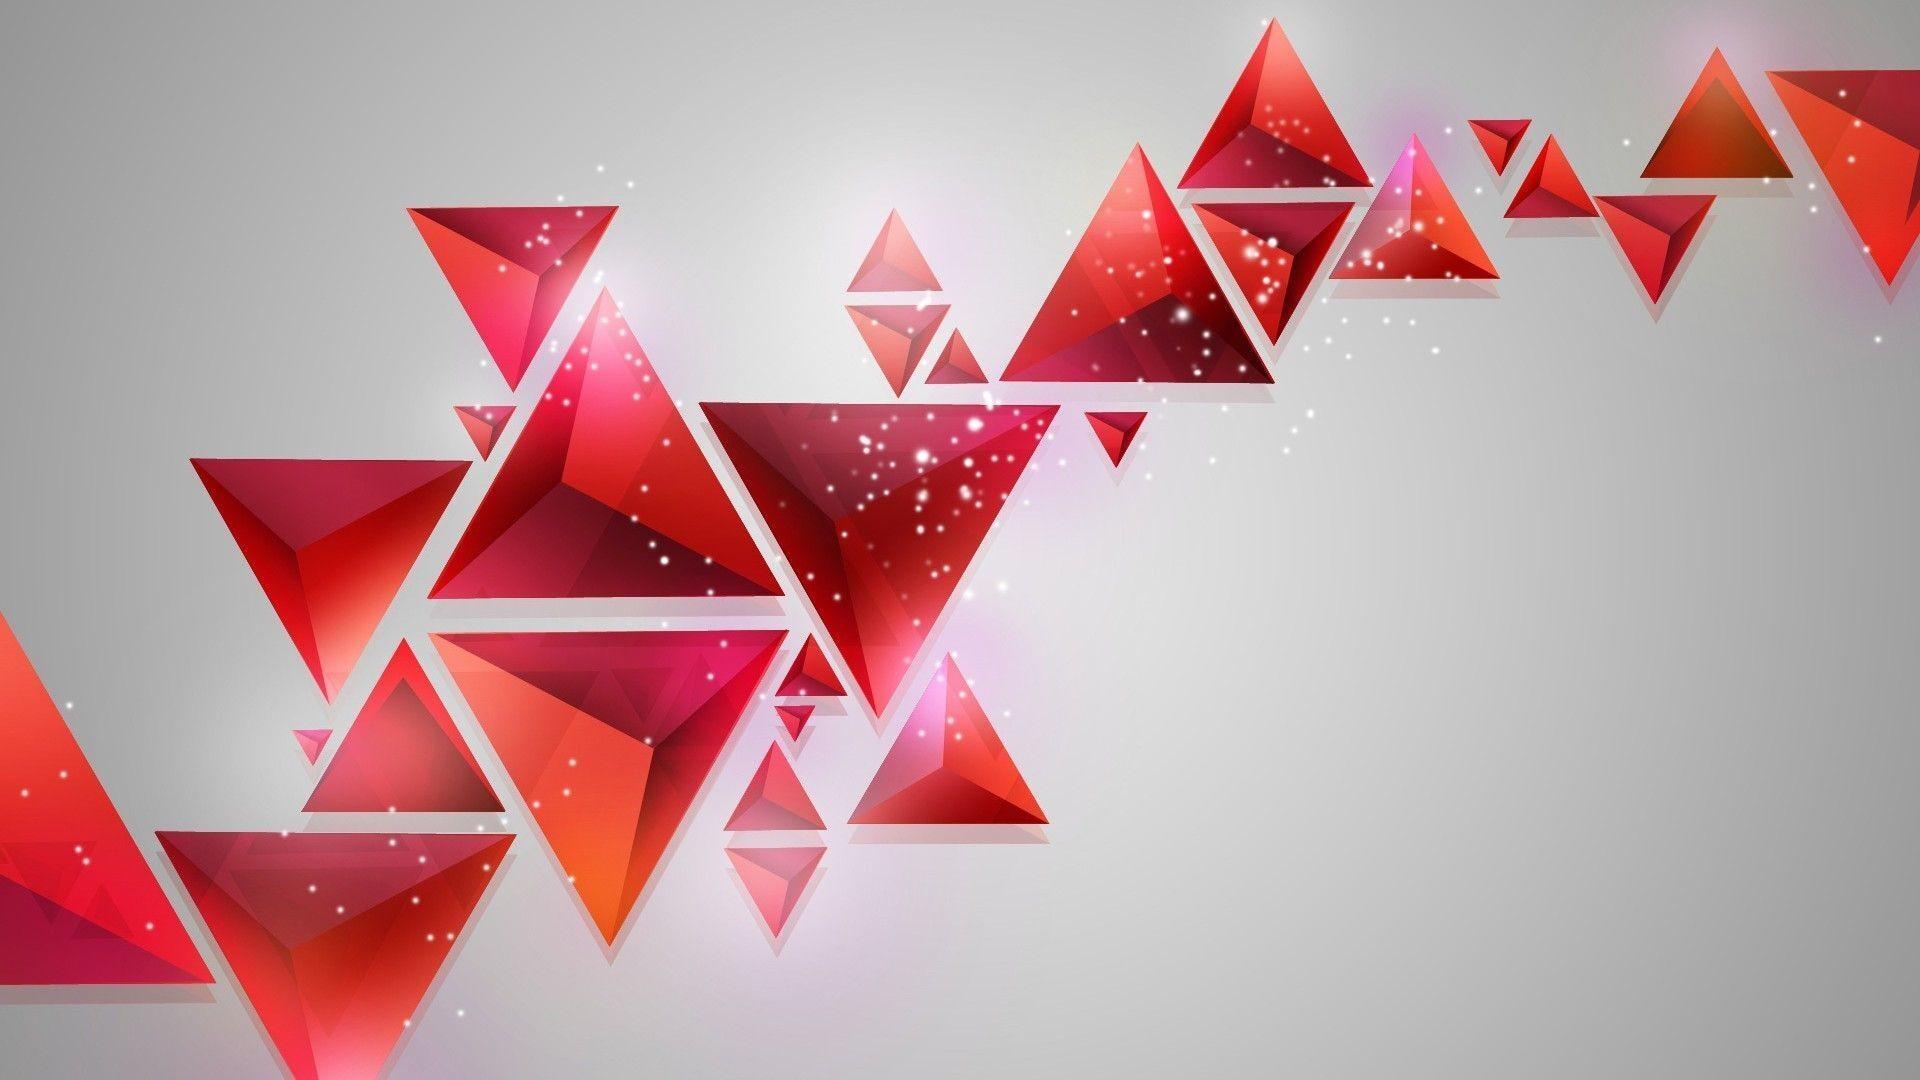 Triangle: Abstract polygonal figures, Red, Obtuse angles, Pyramids. 1920x1080 Full HD Wallpaper.